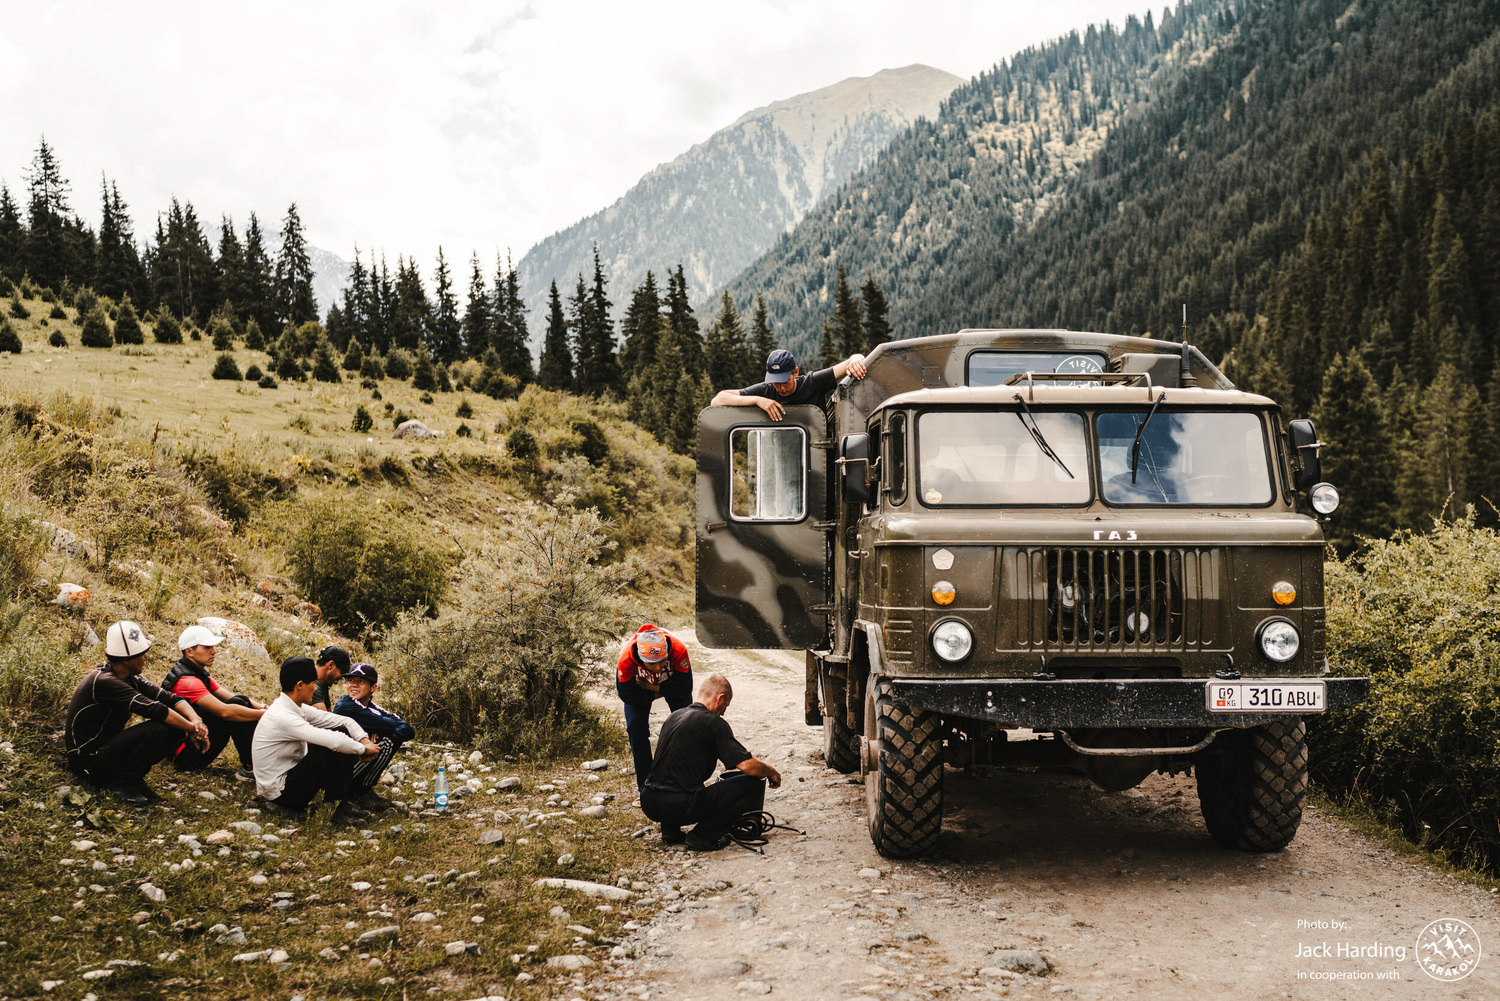 Our military style truck, one of the few ways to get around this part of town. Photo Kai Grossmann.